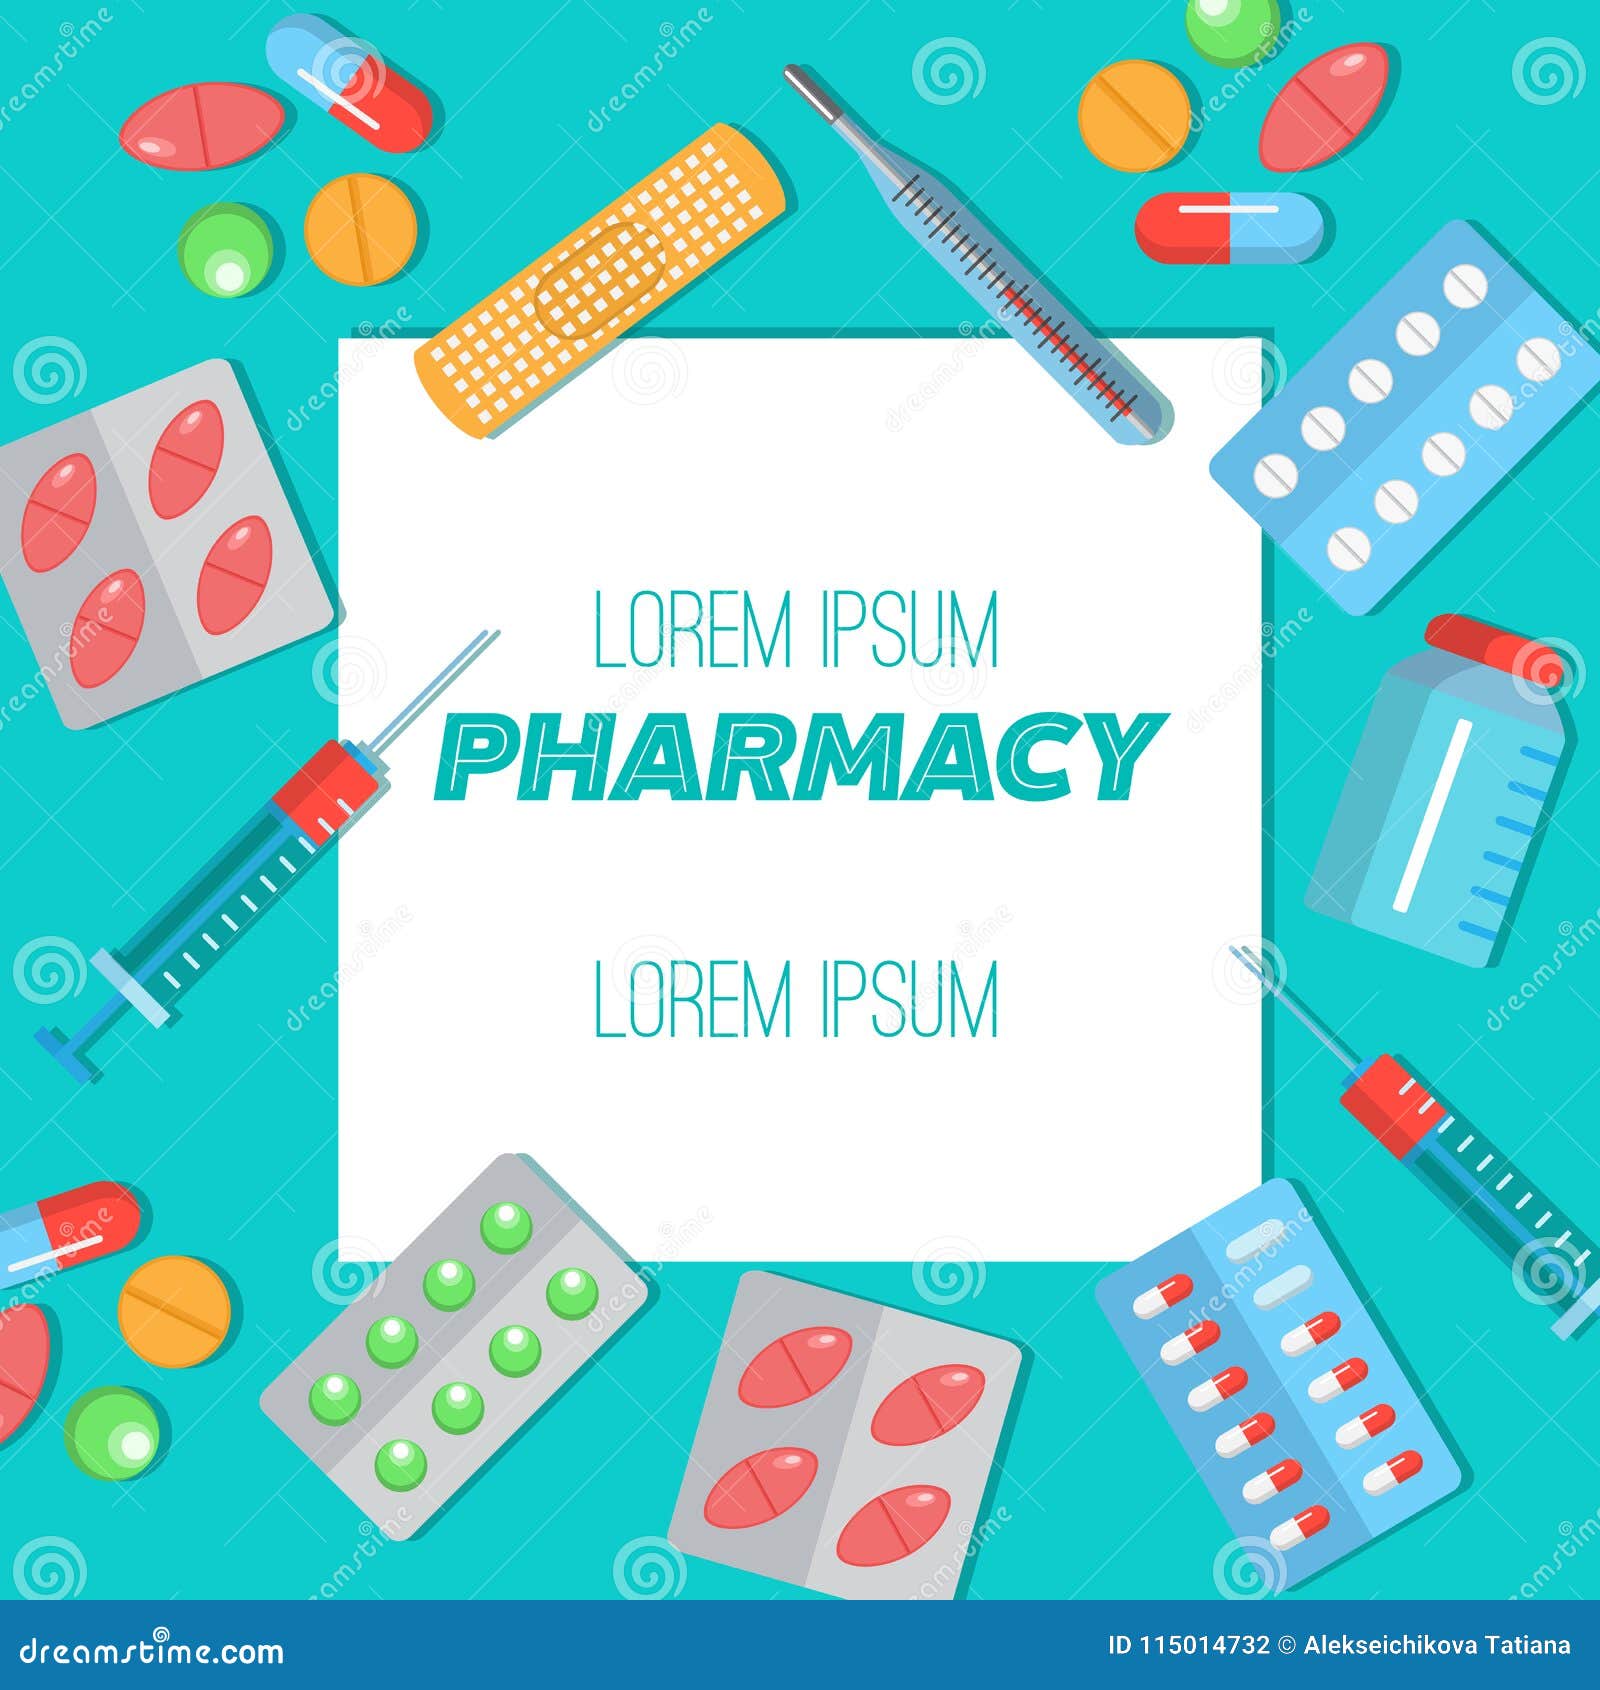 Pharmacy Poster with Flat Icons Stock Vector - Illustration of colorful ...